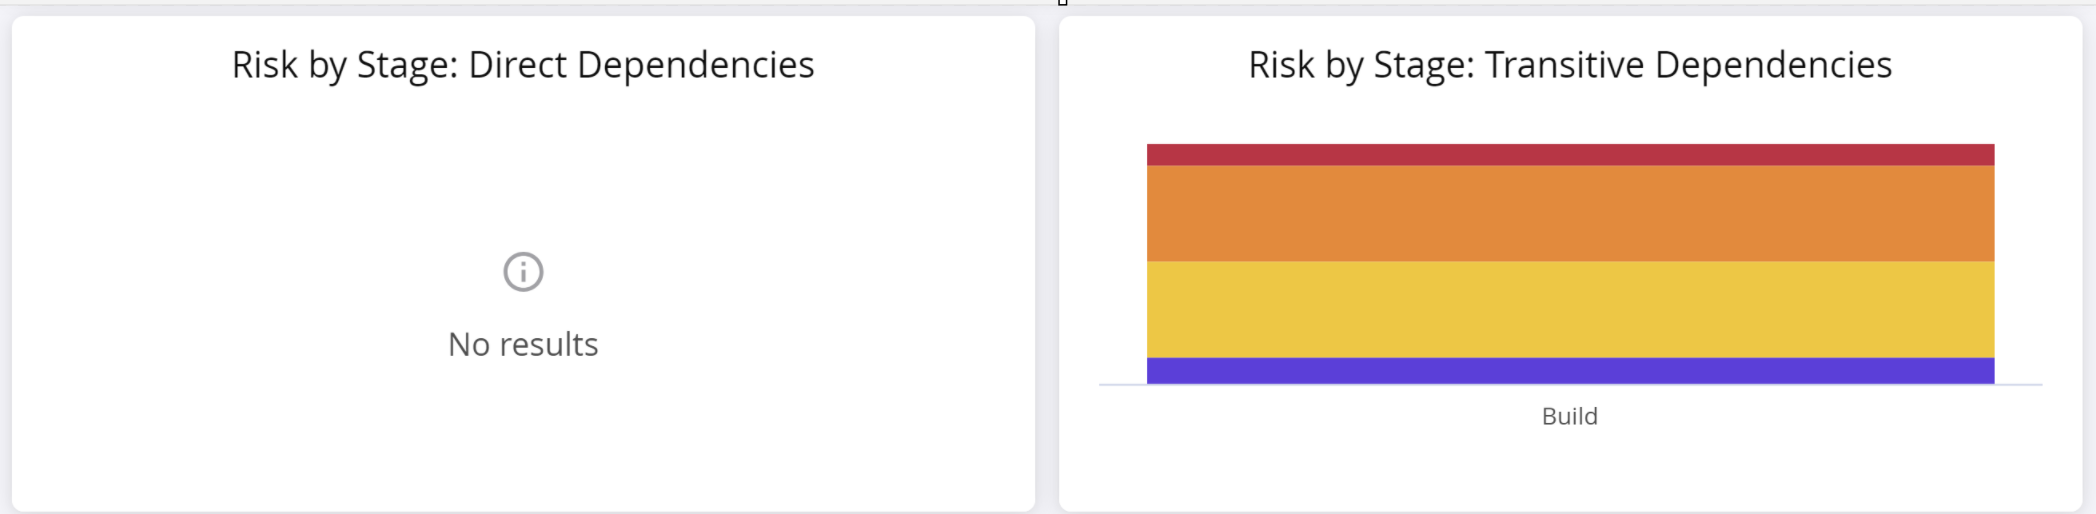 risk_by_stage_.png